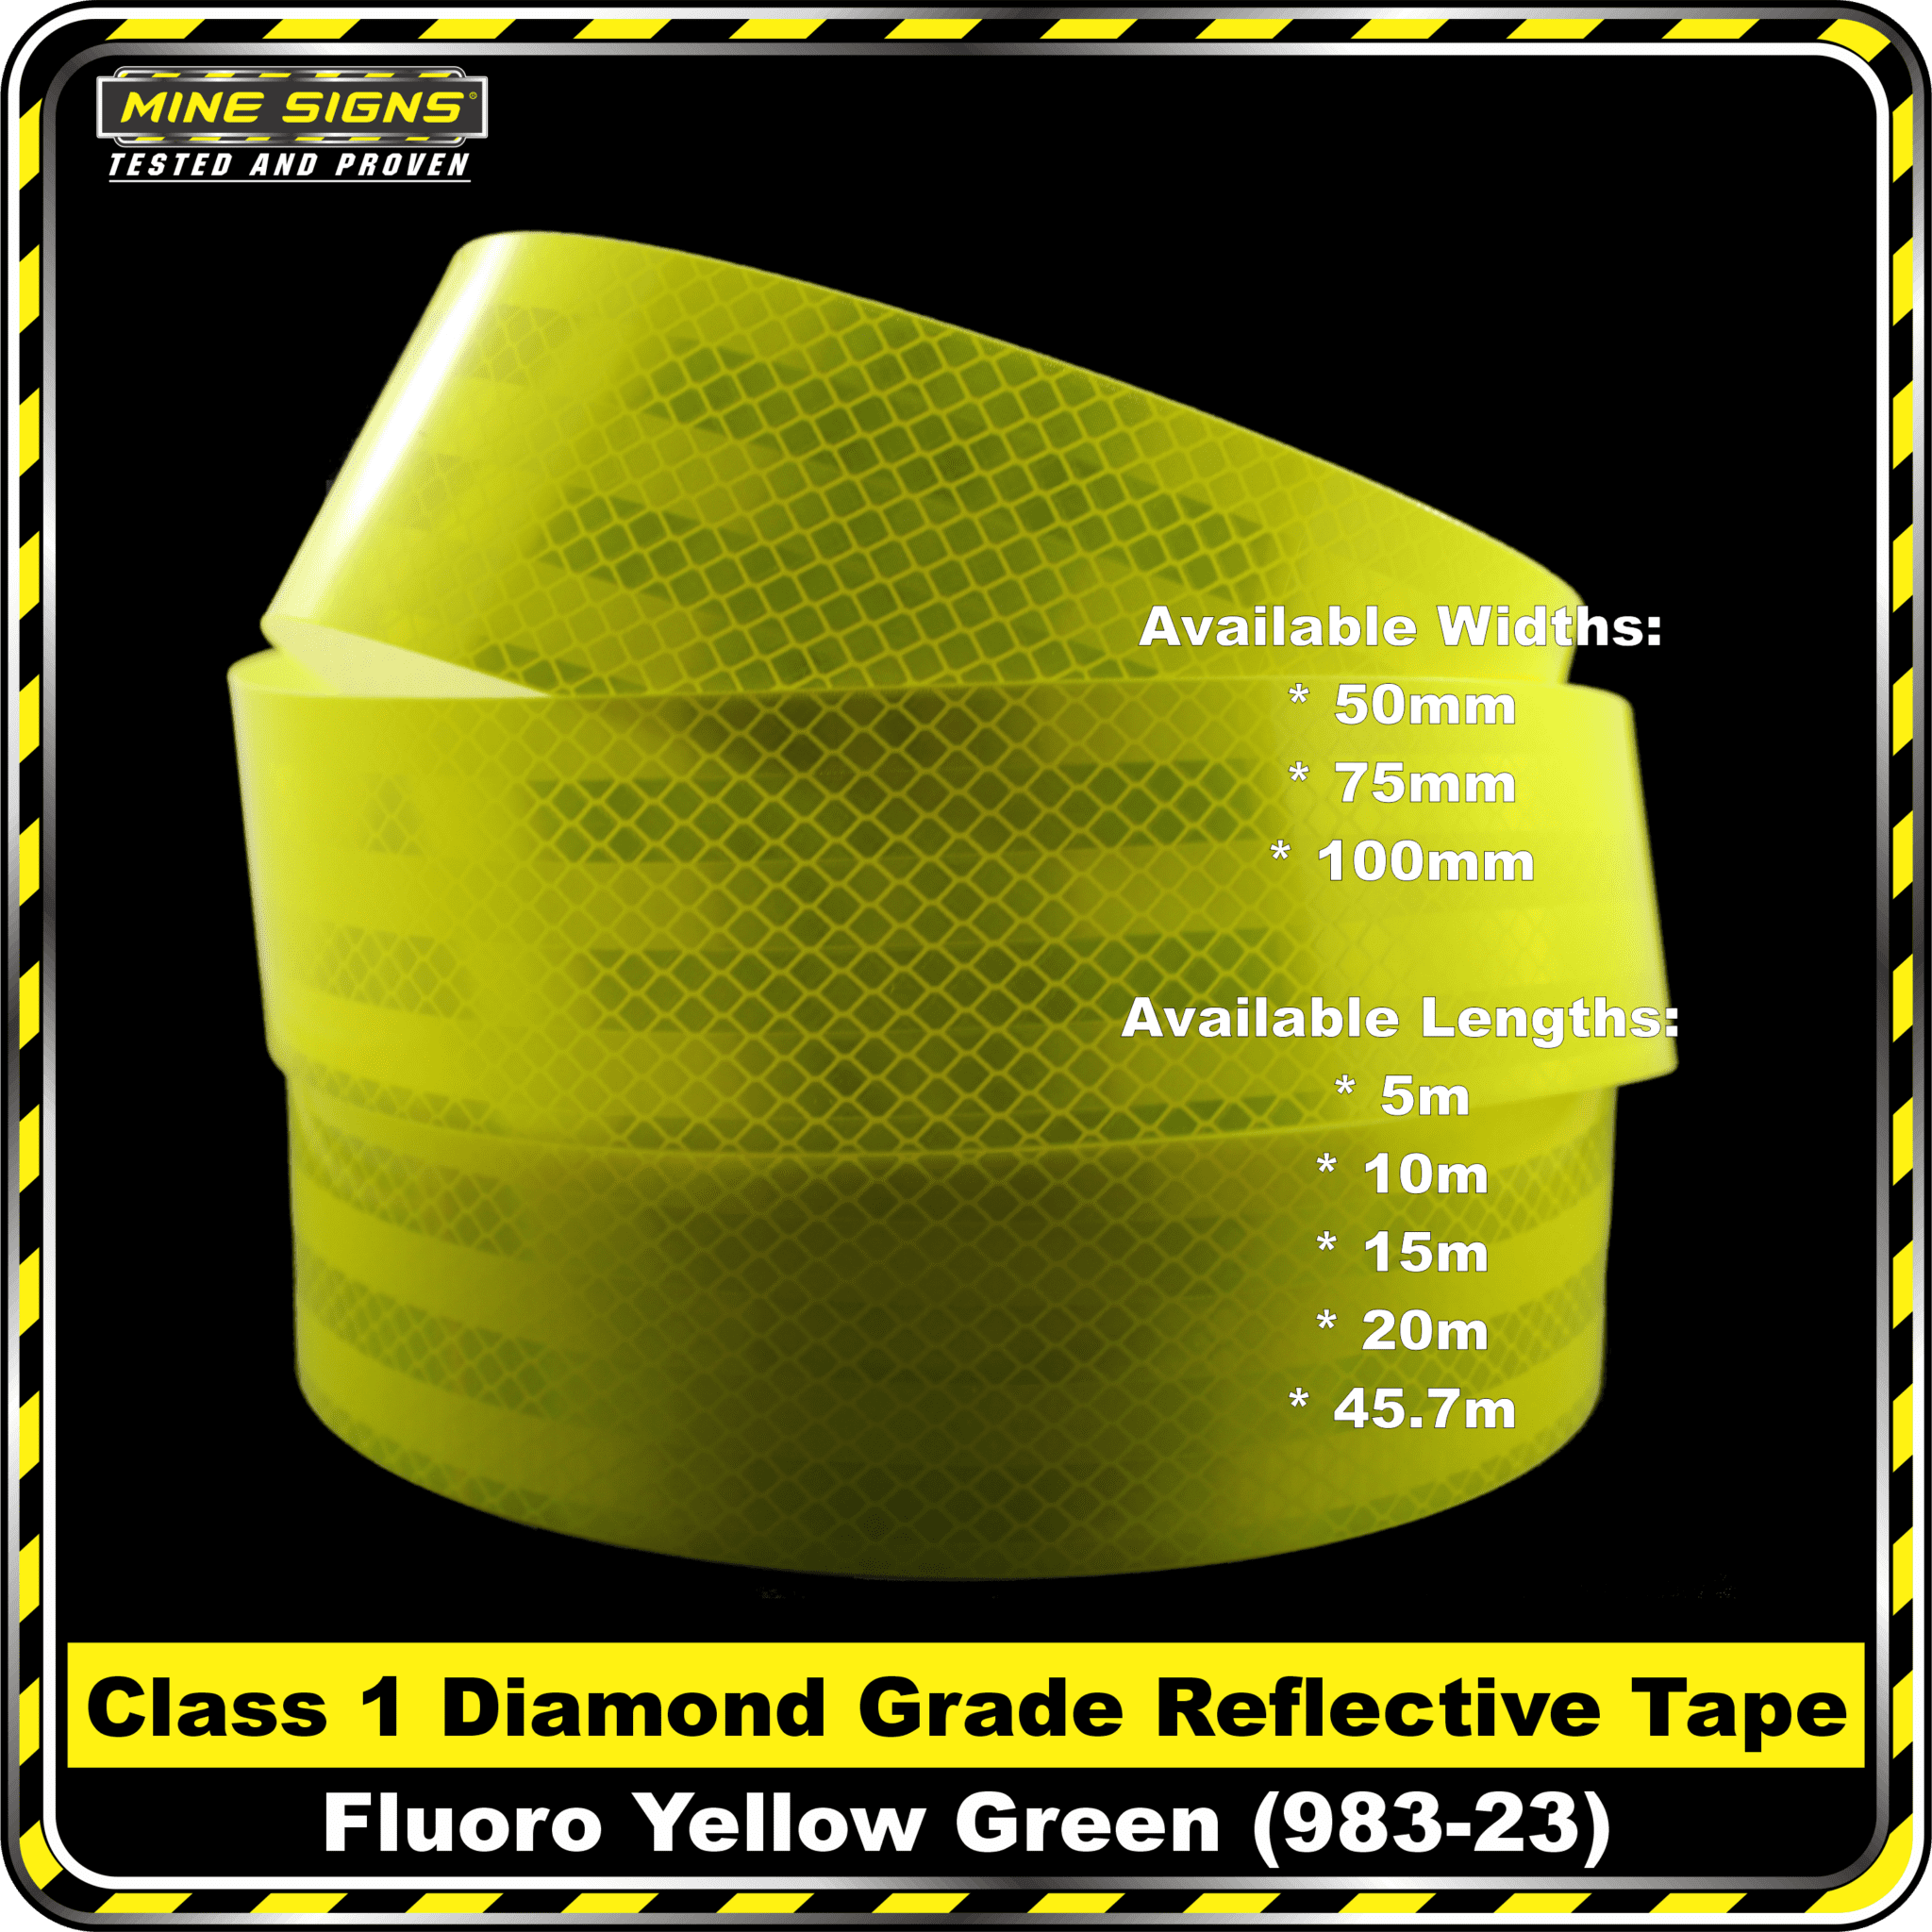 Durable, mirco prismatic, retro reflect ive sheeting MS - Catergory Backgrounds - Reflective Tape 983-23